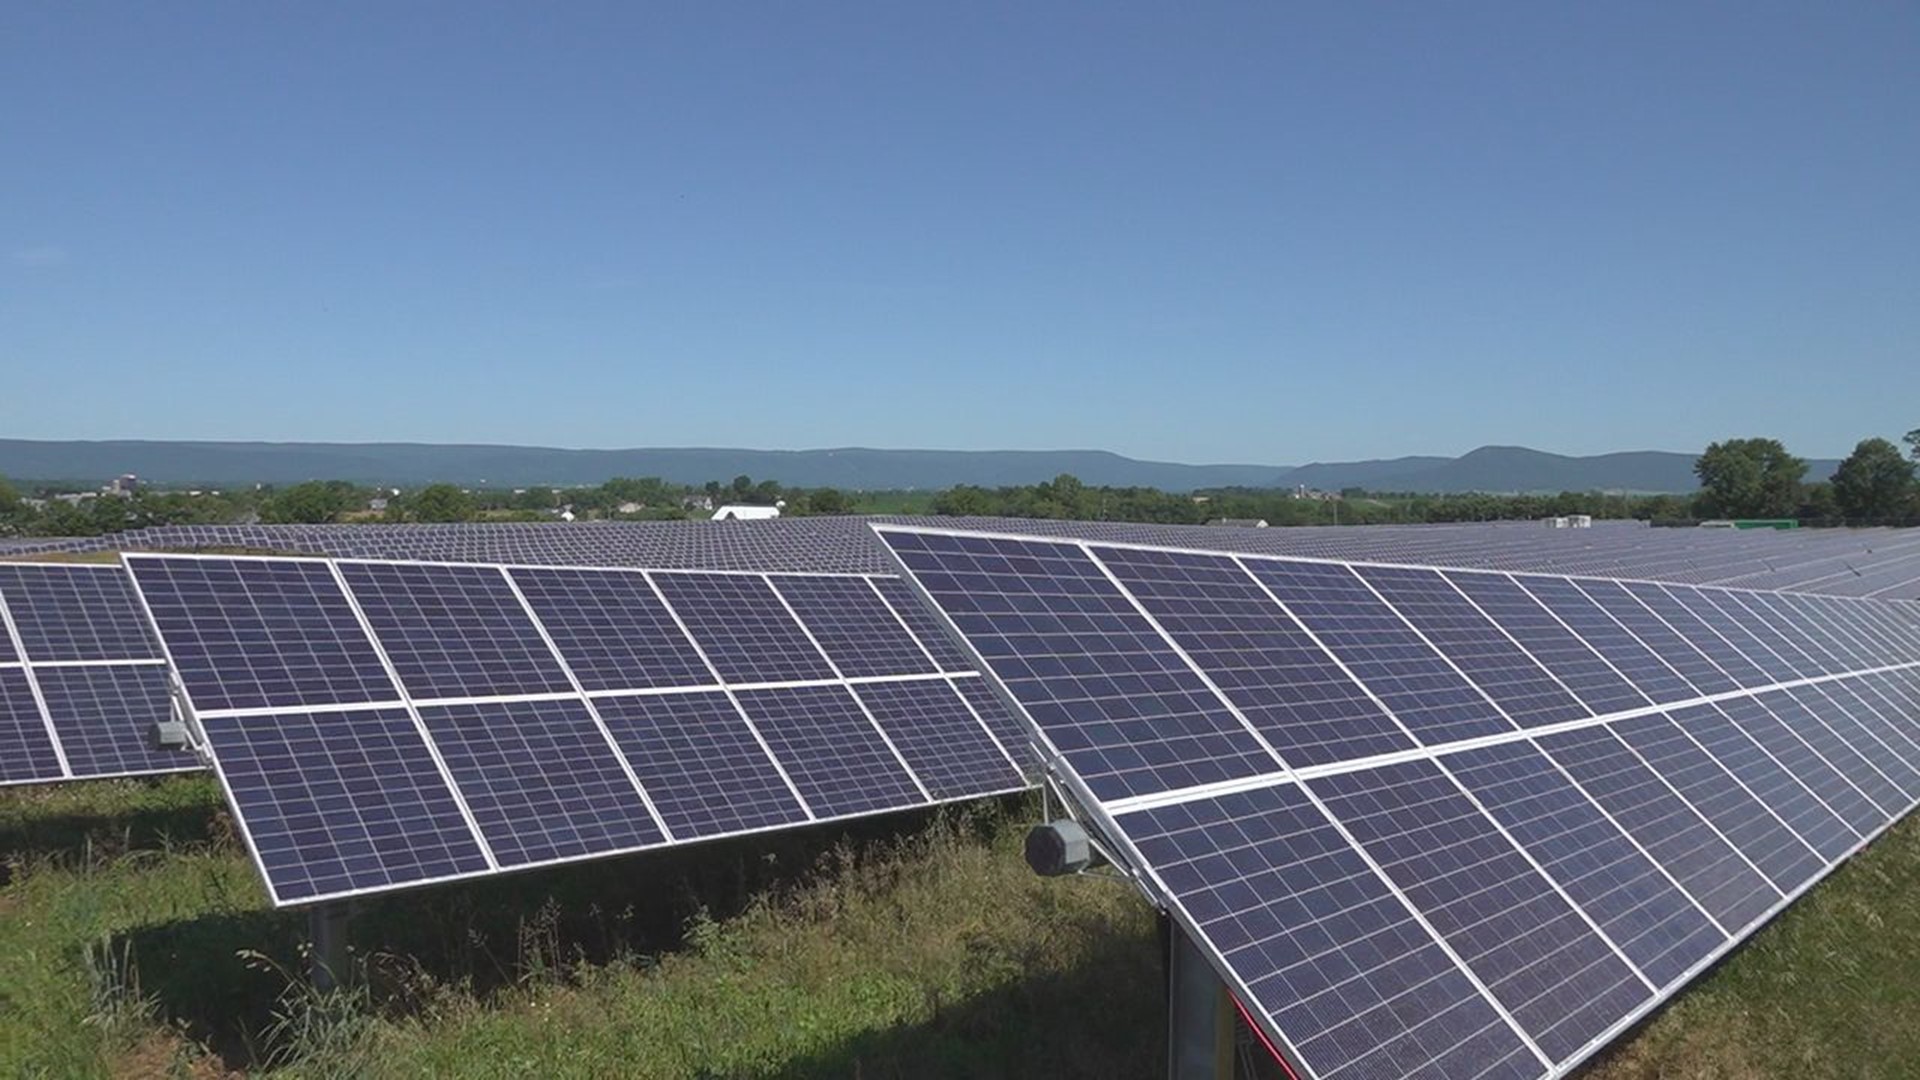 Dover Township could see another solar panel farm in the area. A public hearing is scheduled for 7 p.m. tonight.